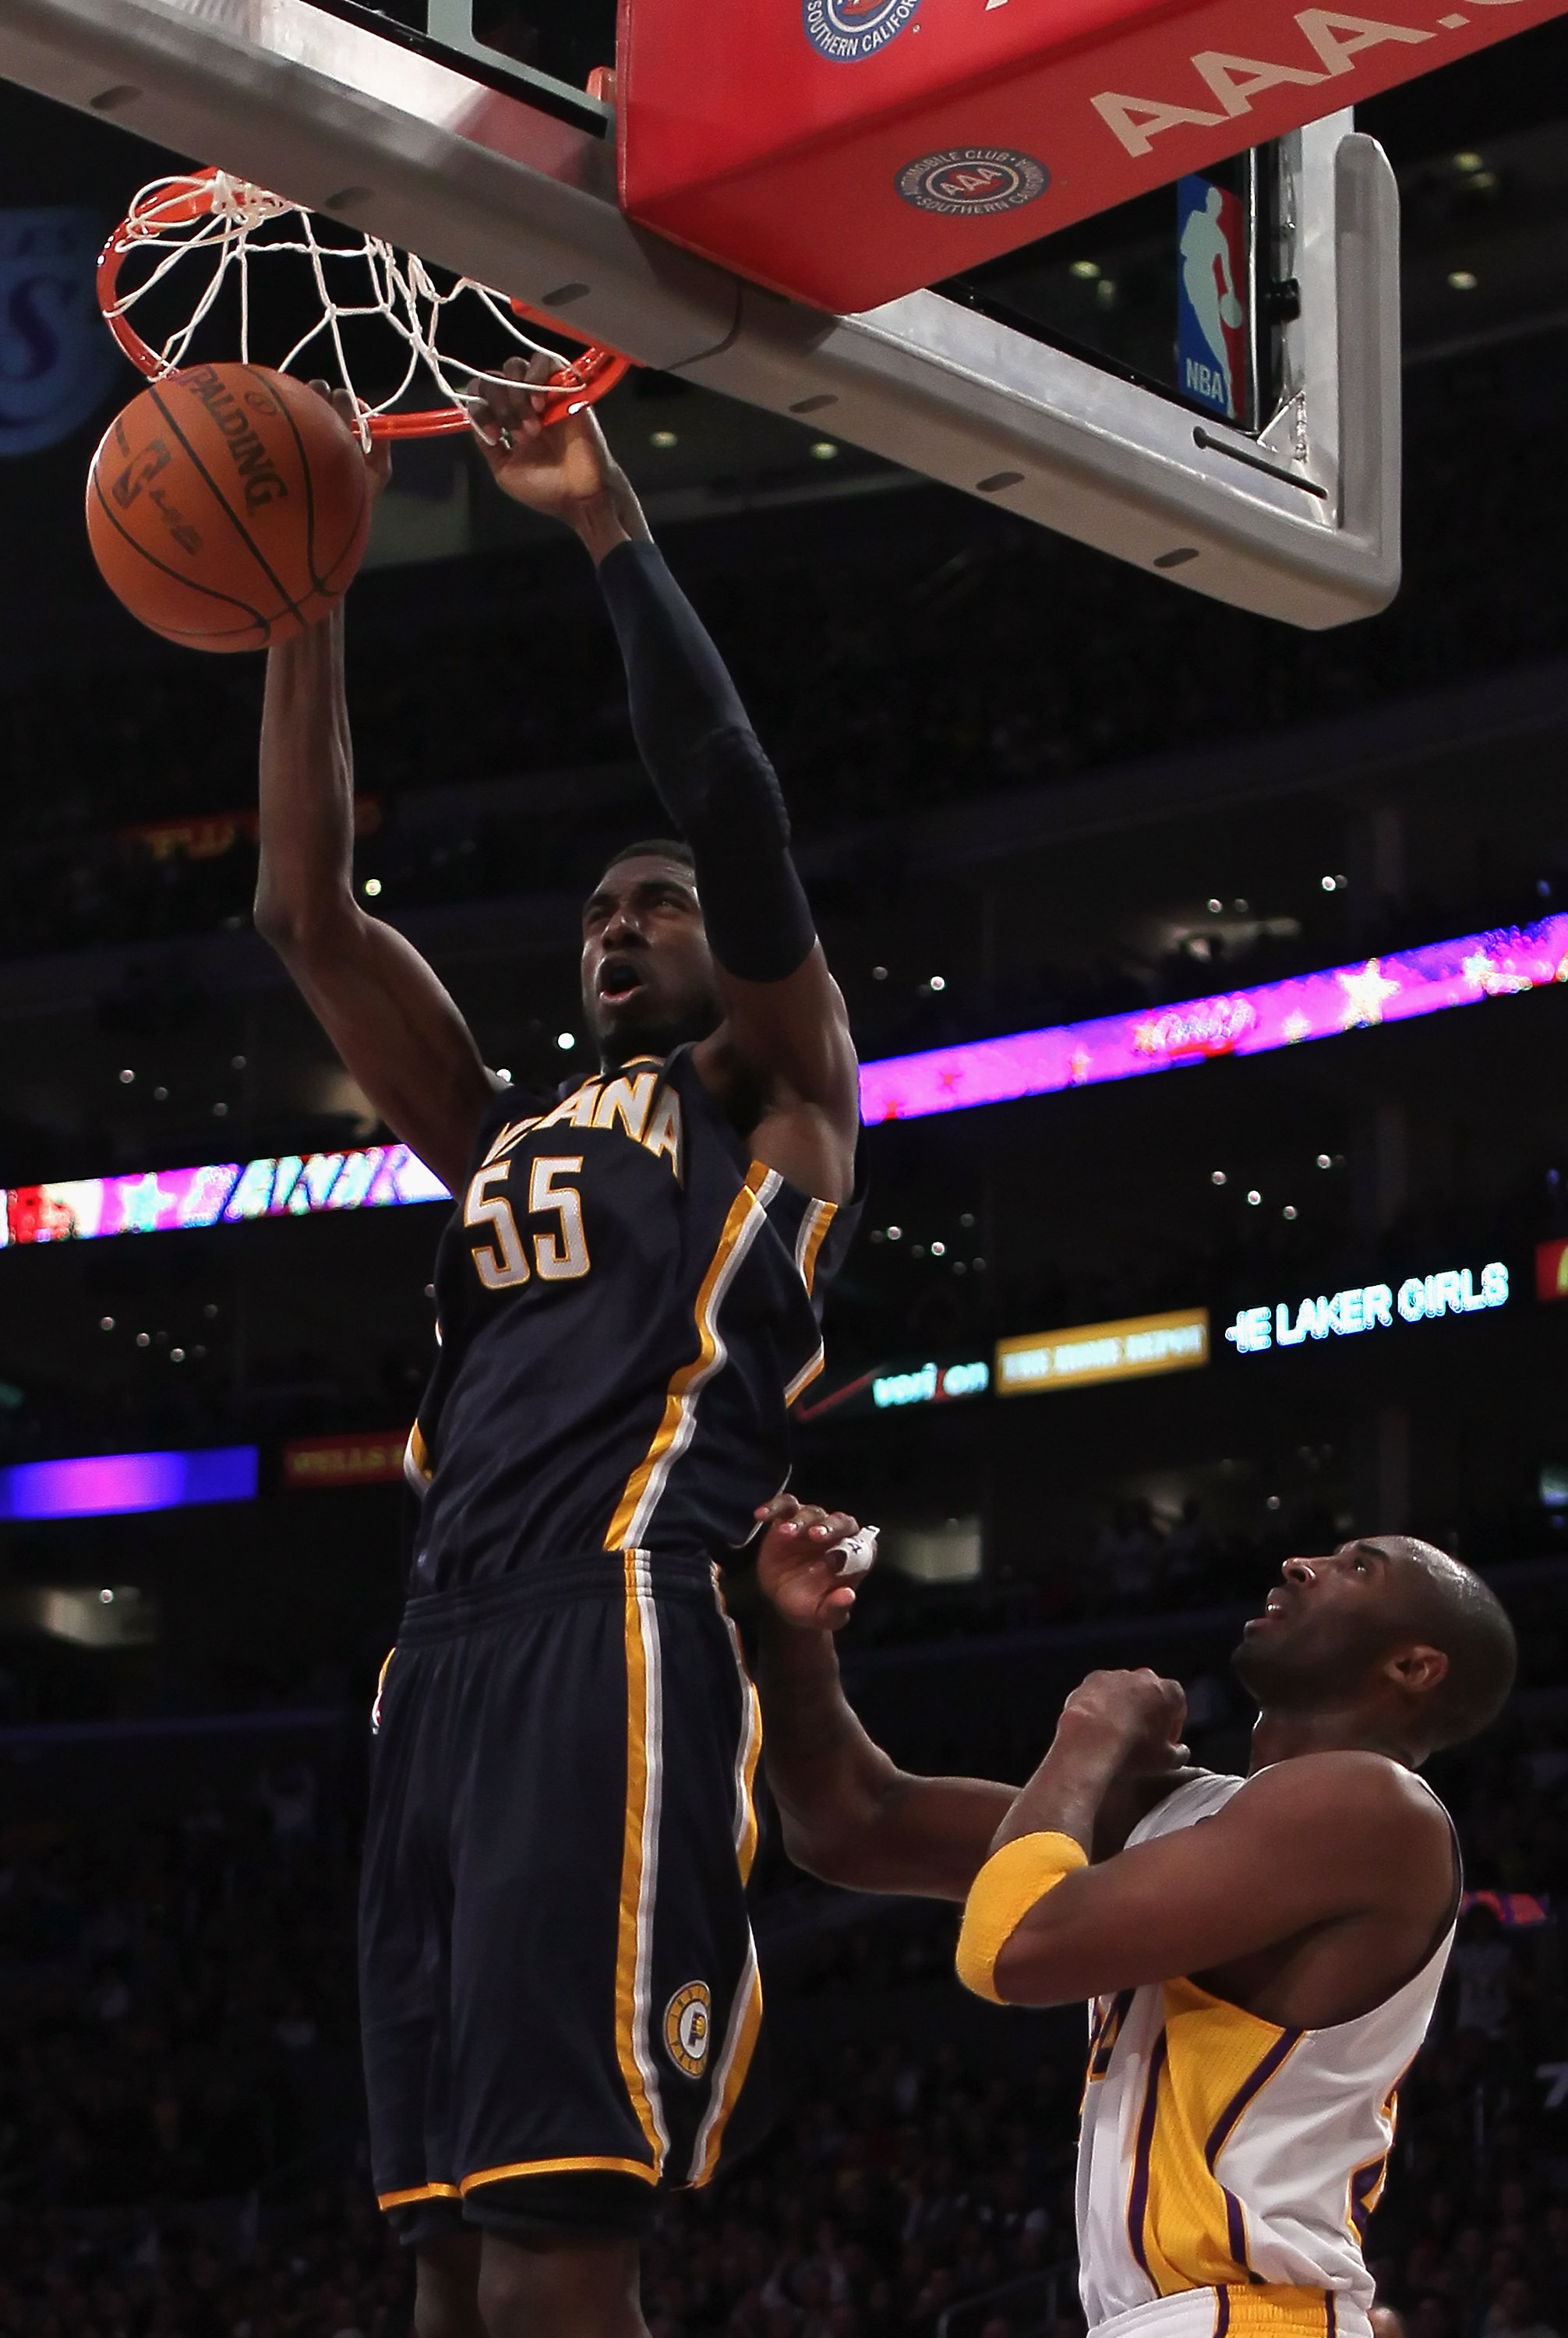 LOS ANGELES, CA - NOVEMBER 28:  Roy Hibbert #55 of the Indiana Pacers dunks the ball over Kobe Bryant #24 of the Los Angeles Lakers during the fourth quarter at Staples Center on November 28, 2010 in Los Angeles, California. The Pacers defeated the Lakers